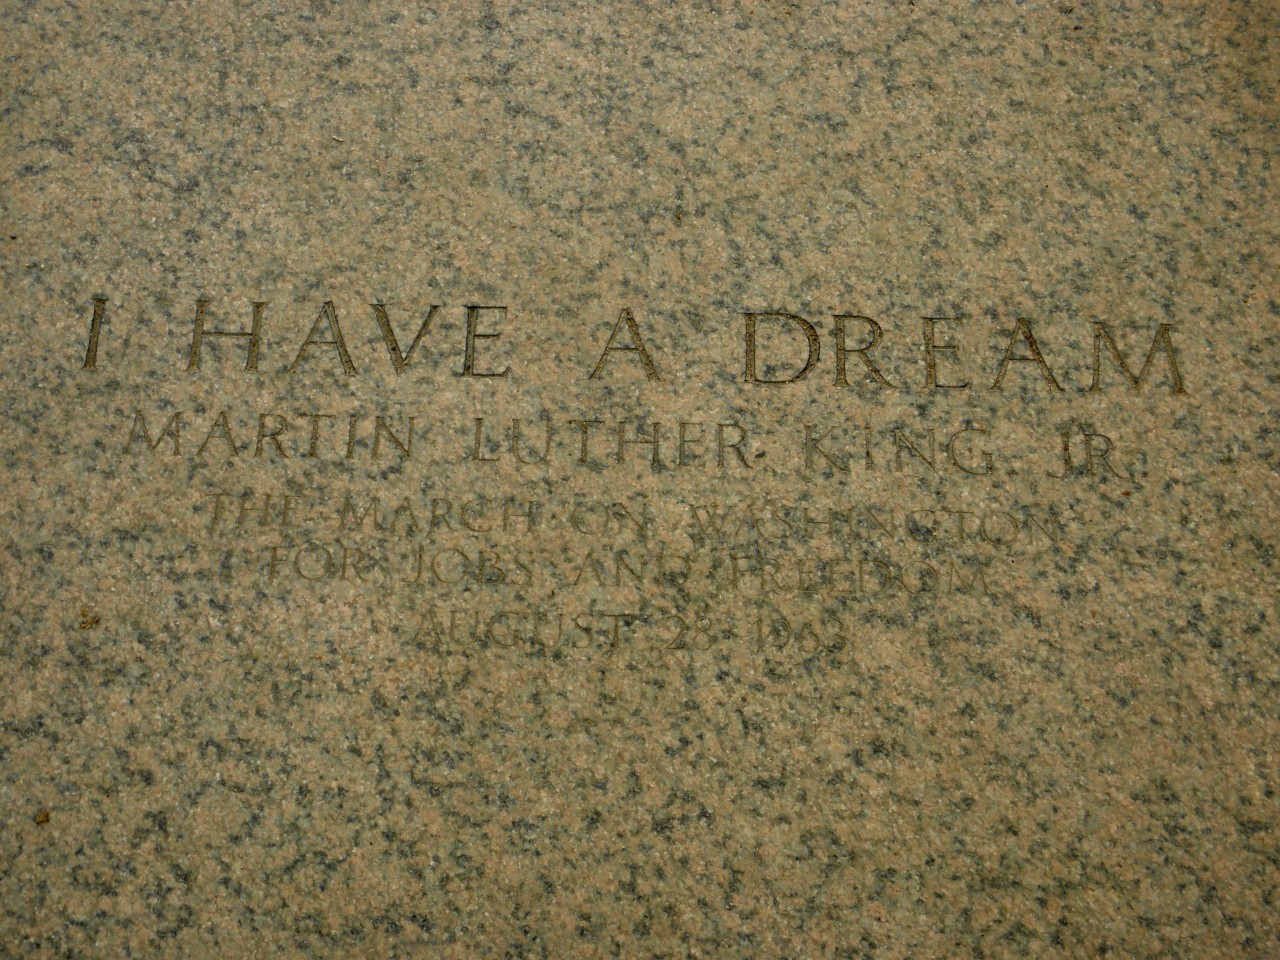 The Lincoln Memorial – I Have a Dream